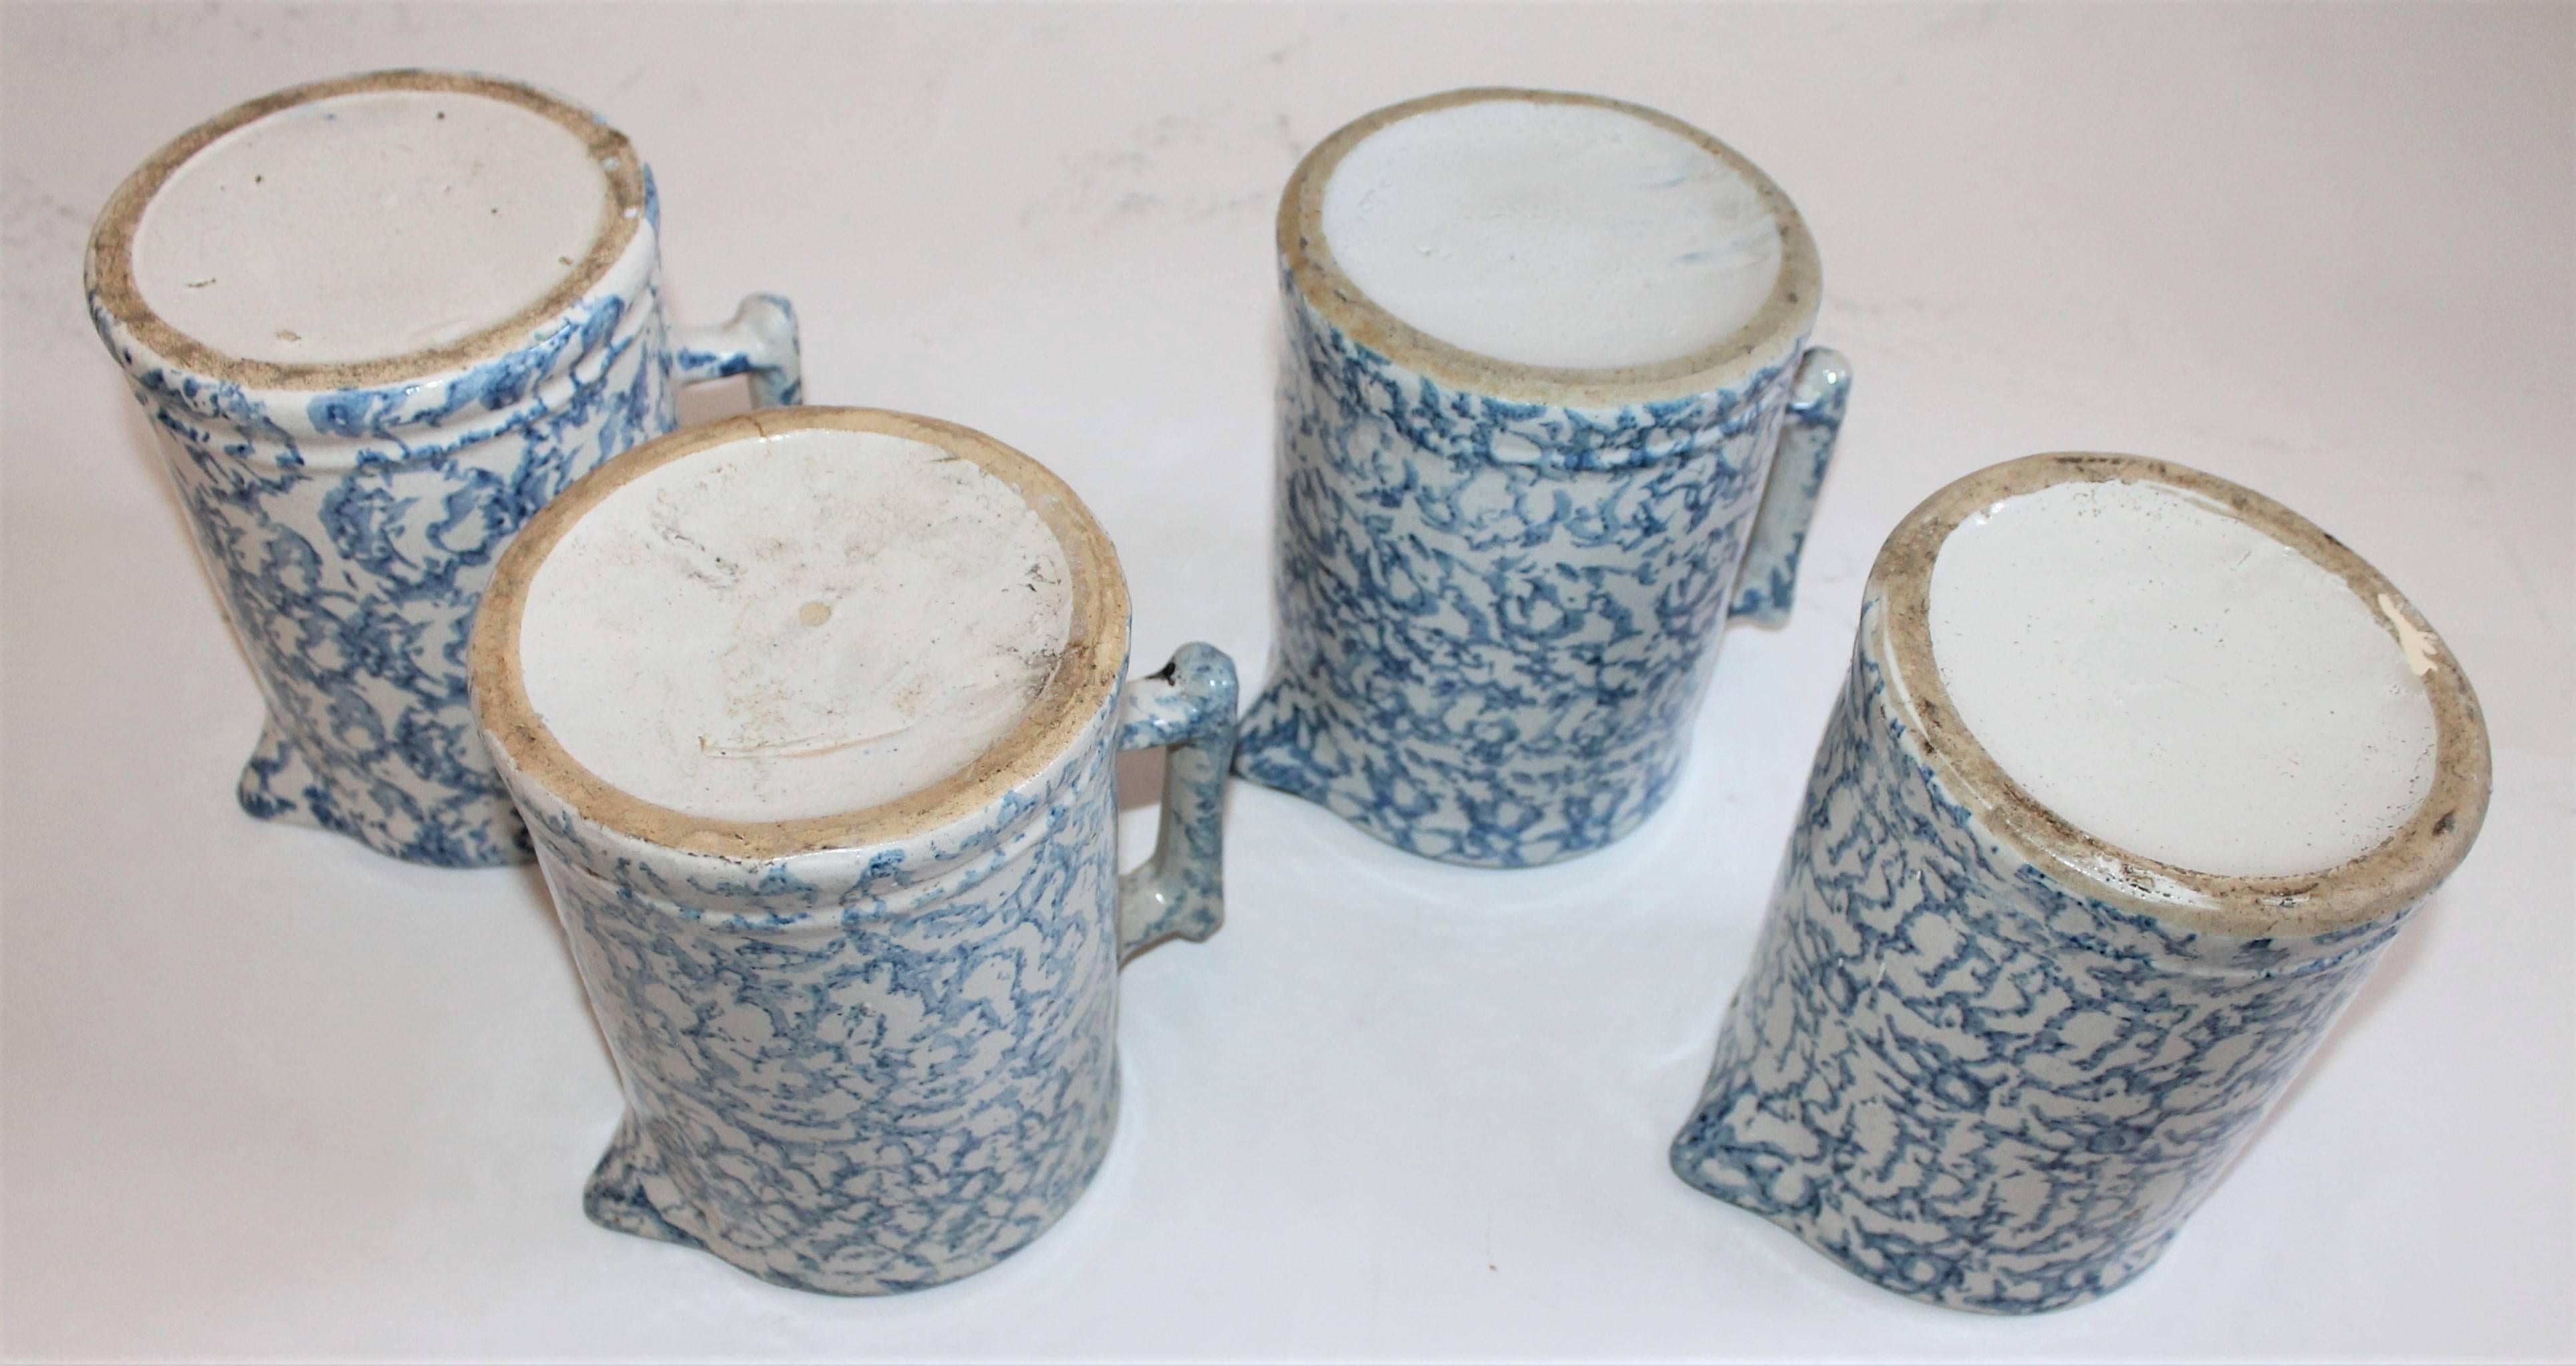 Hand-Painted Collection of Four 19th Century Sponge Ware Milk Pitcher